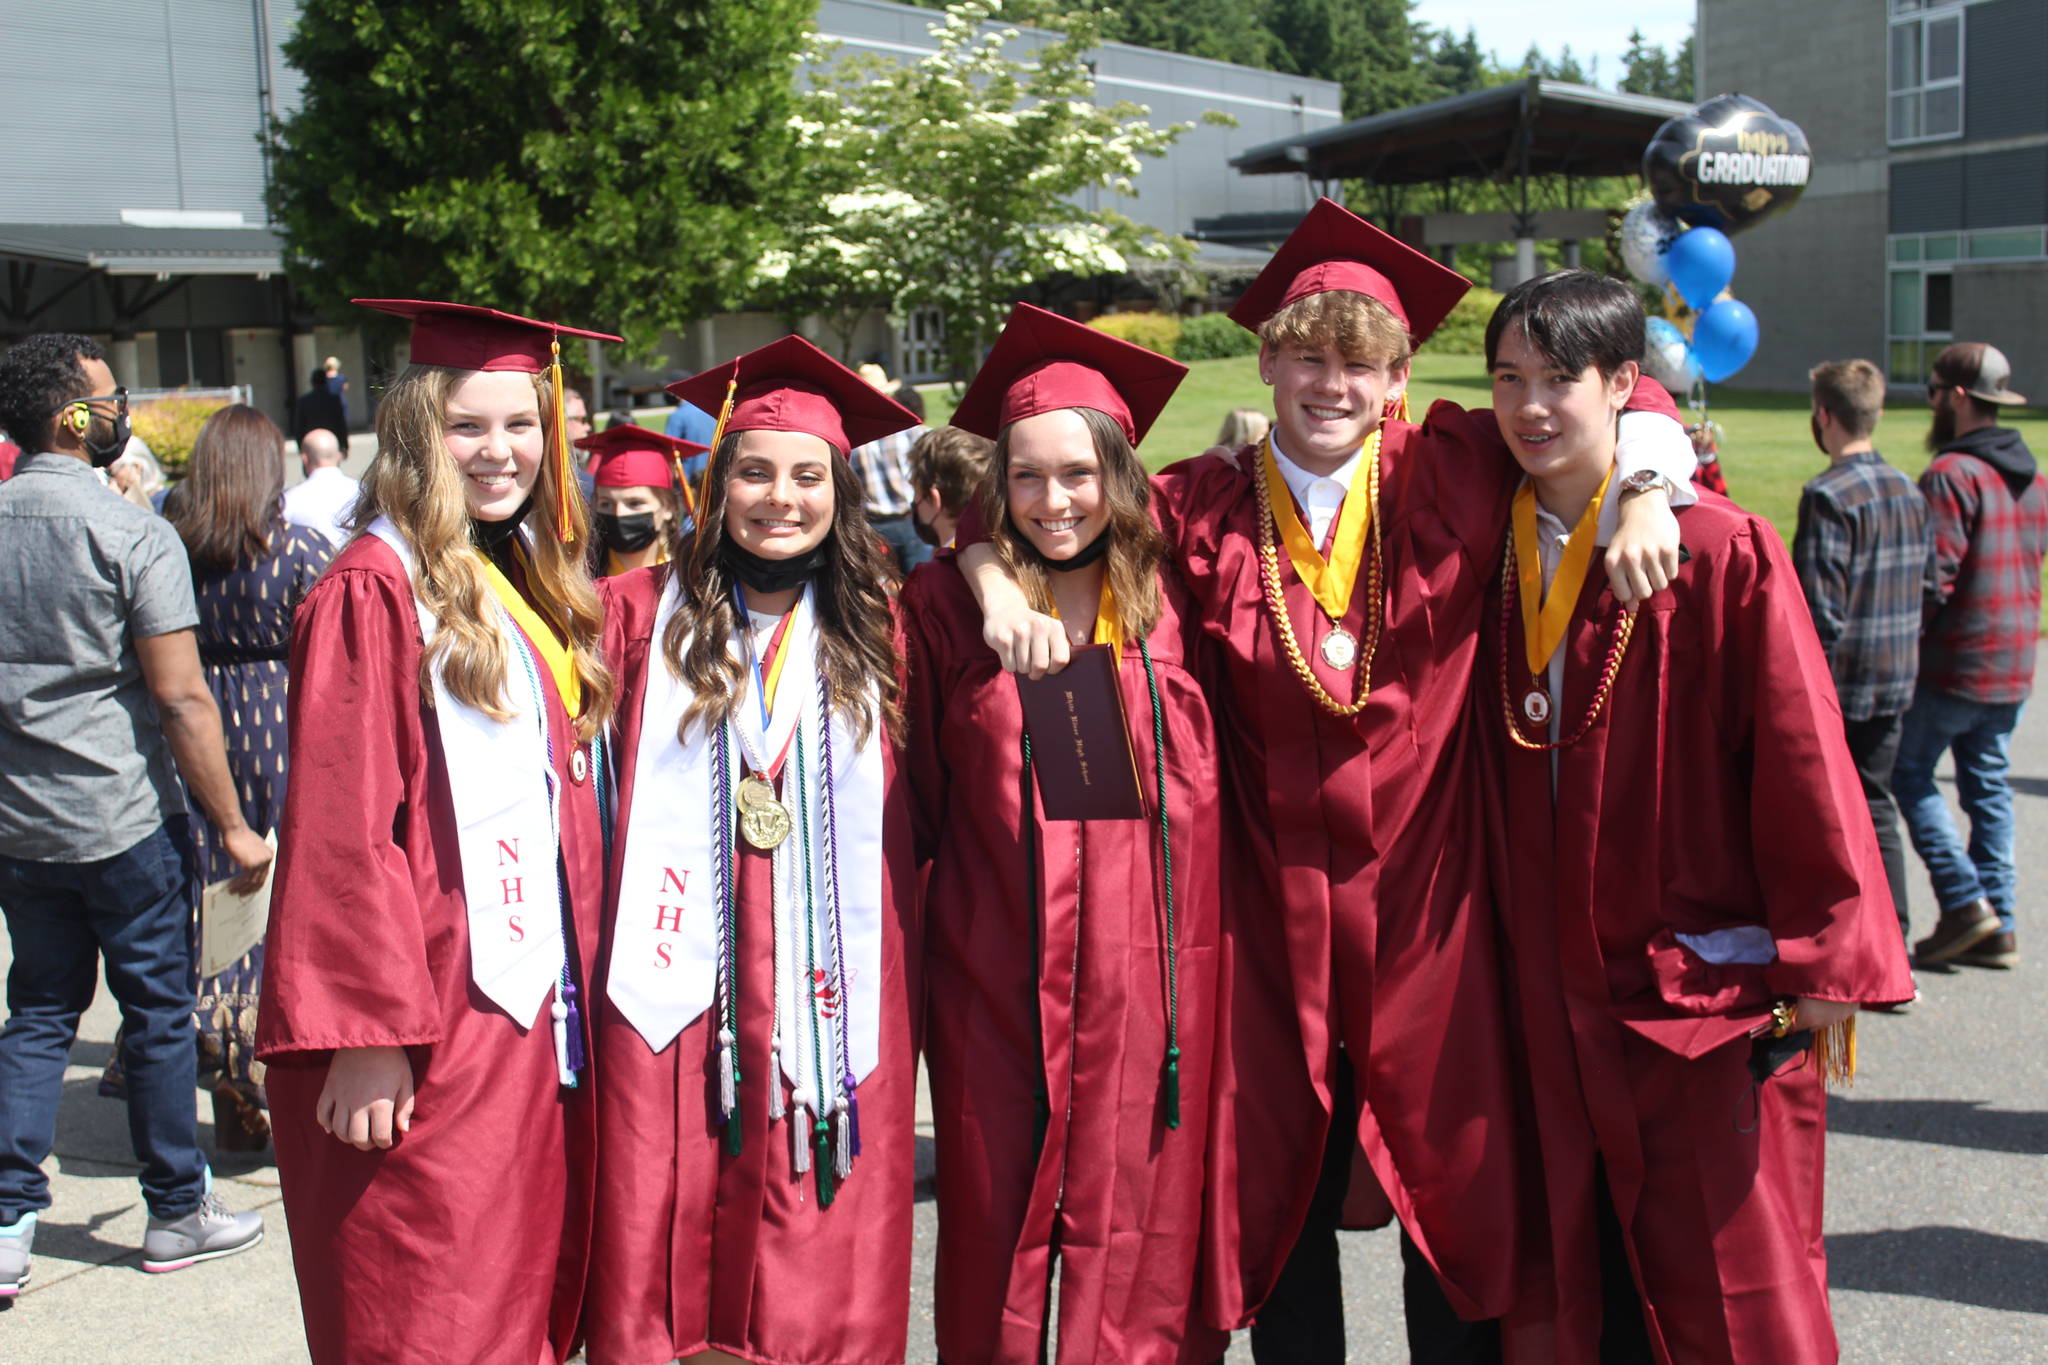 WRHS students gathered together with friends and family to celebrate their accomplishments after the graduation ceremony. Photo by Ray Miller-Still